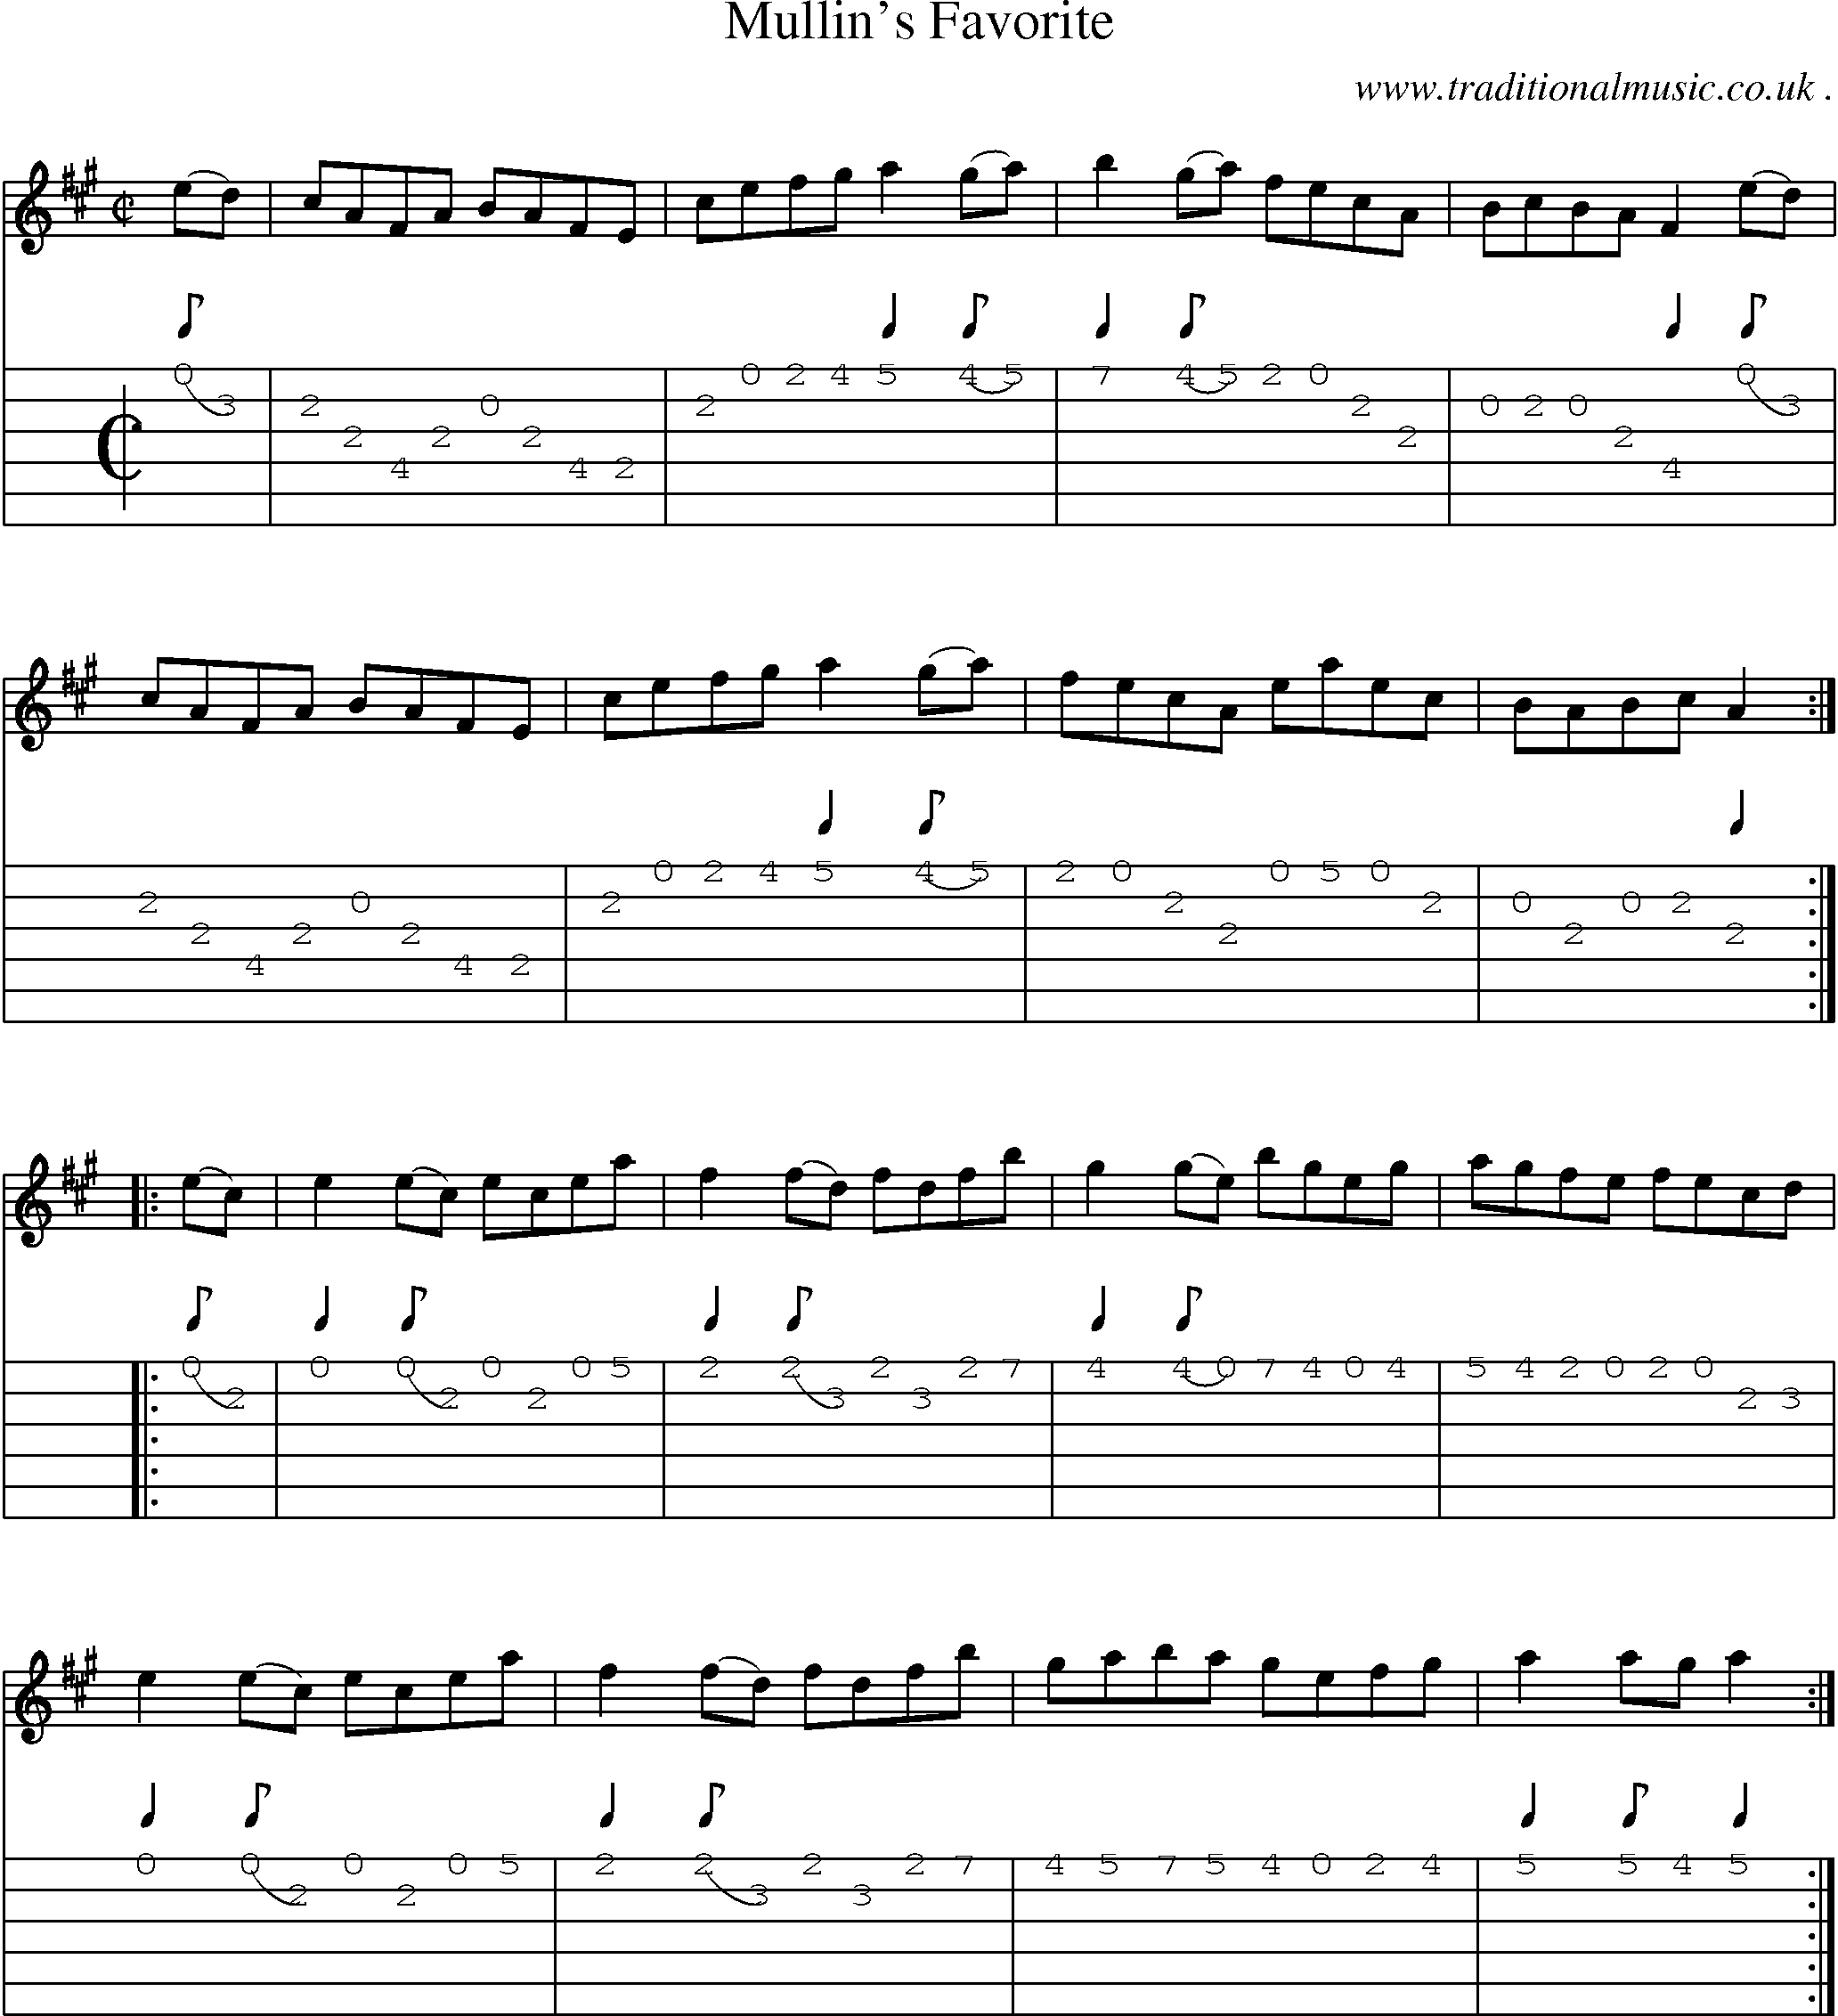 Sheet-Music and Guitar Tabs for Mullins Favorite